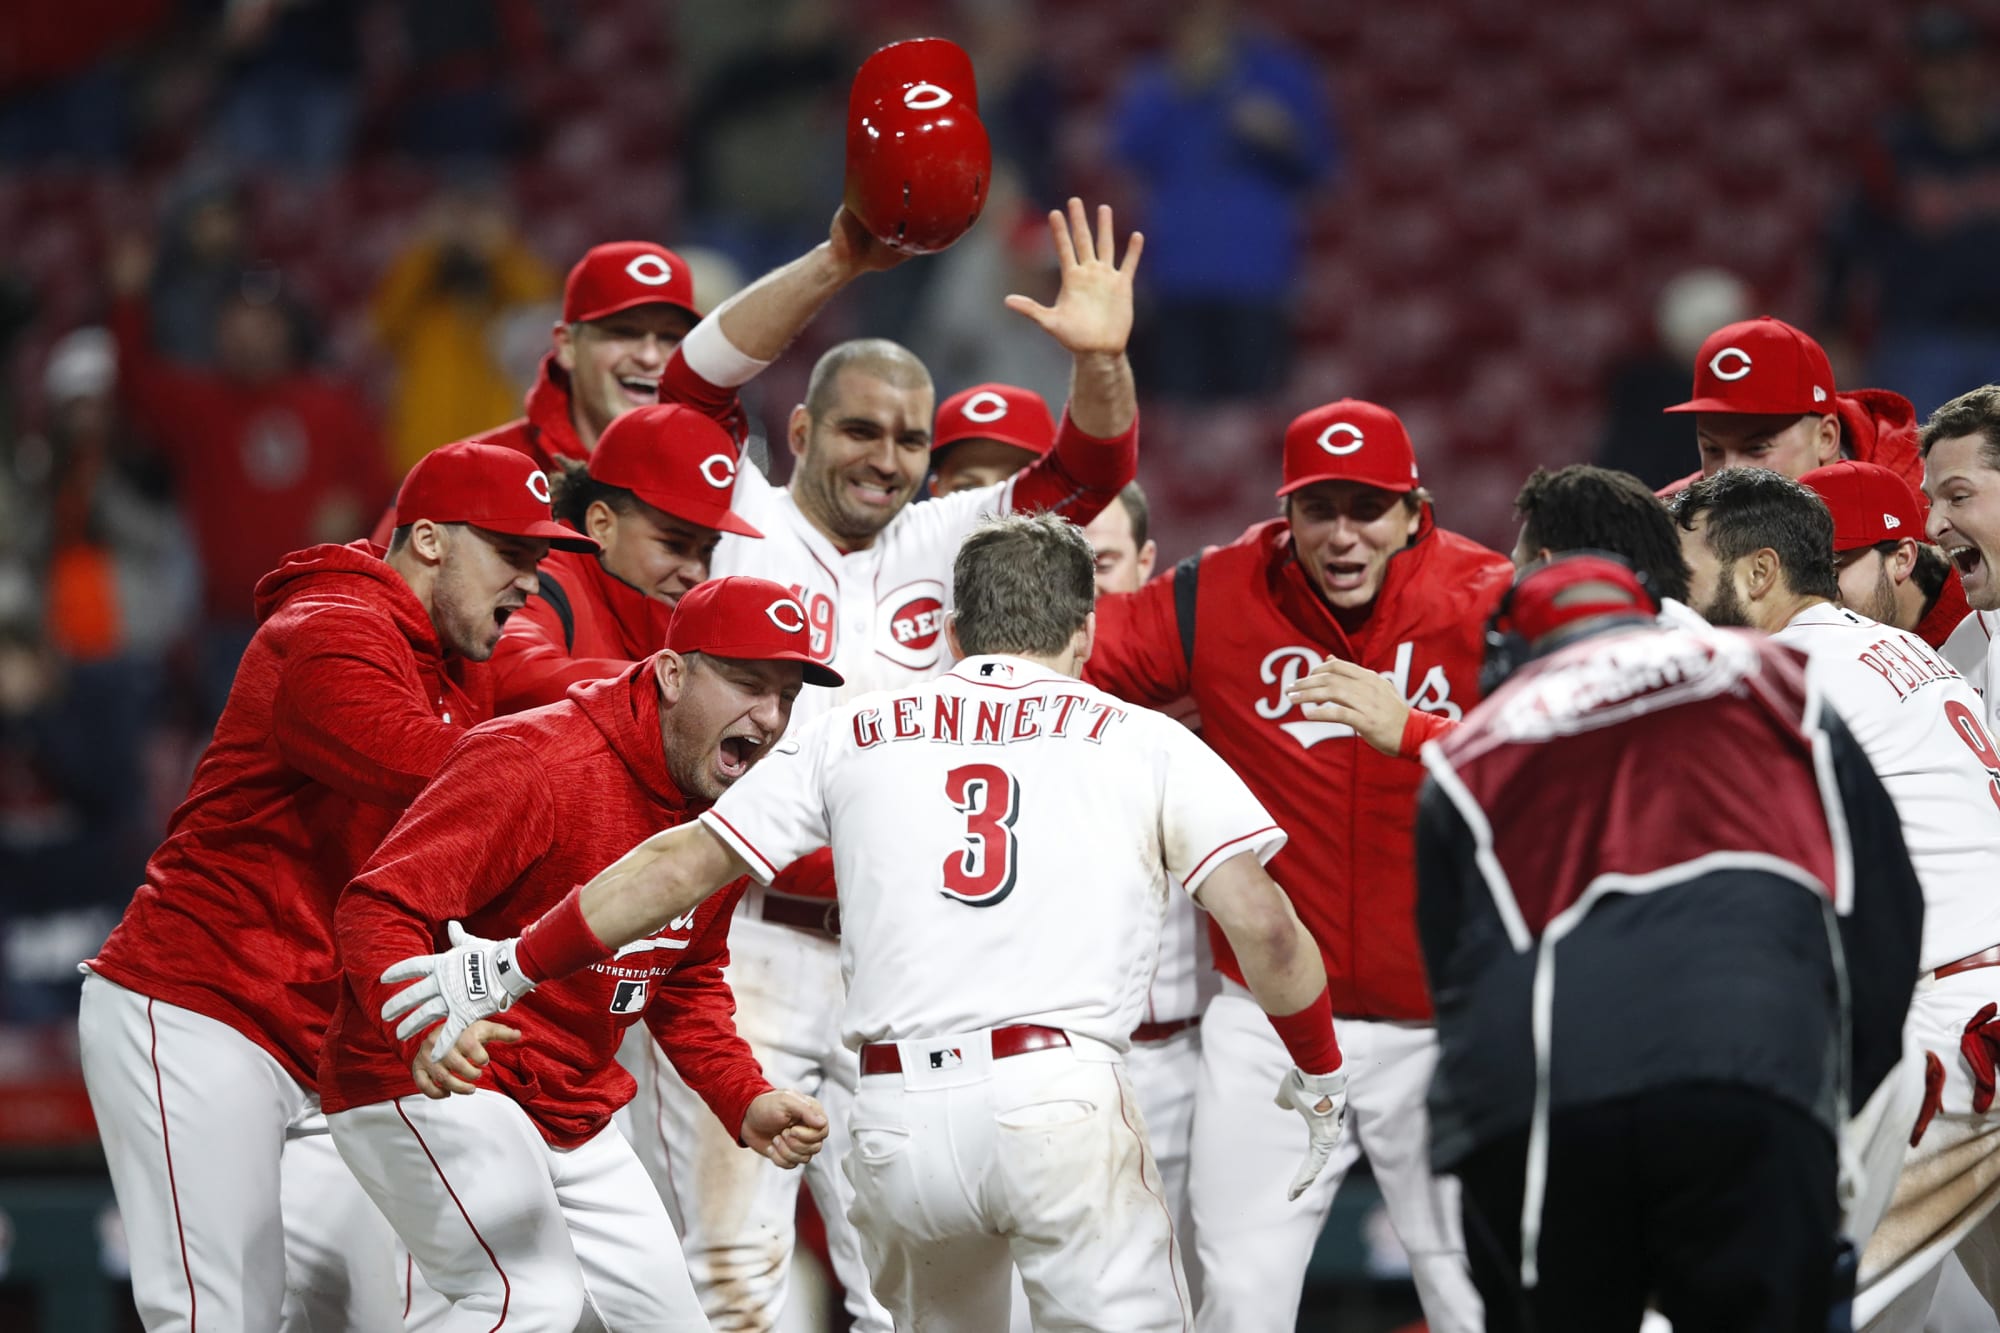 This Cincinnati Reds team is very exciting to watch